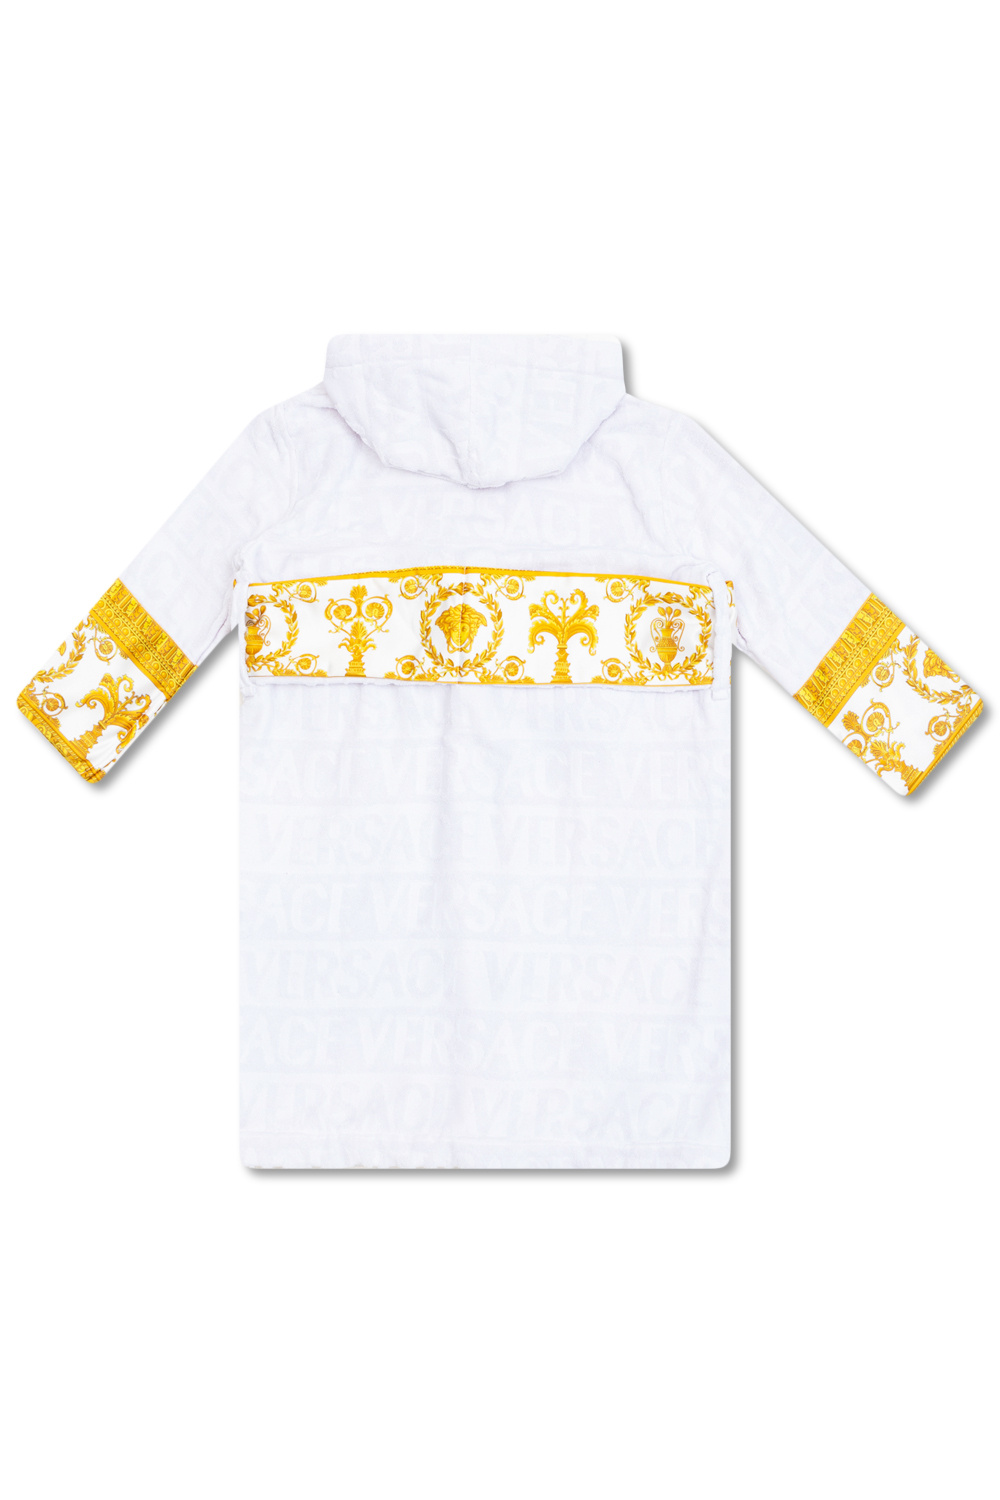 Versace Home BOYS CLOTHES 4-14 YEARS